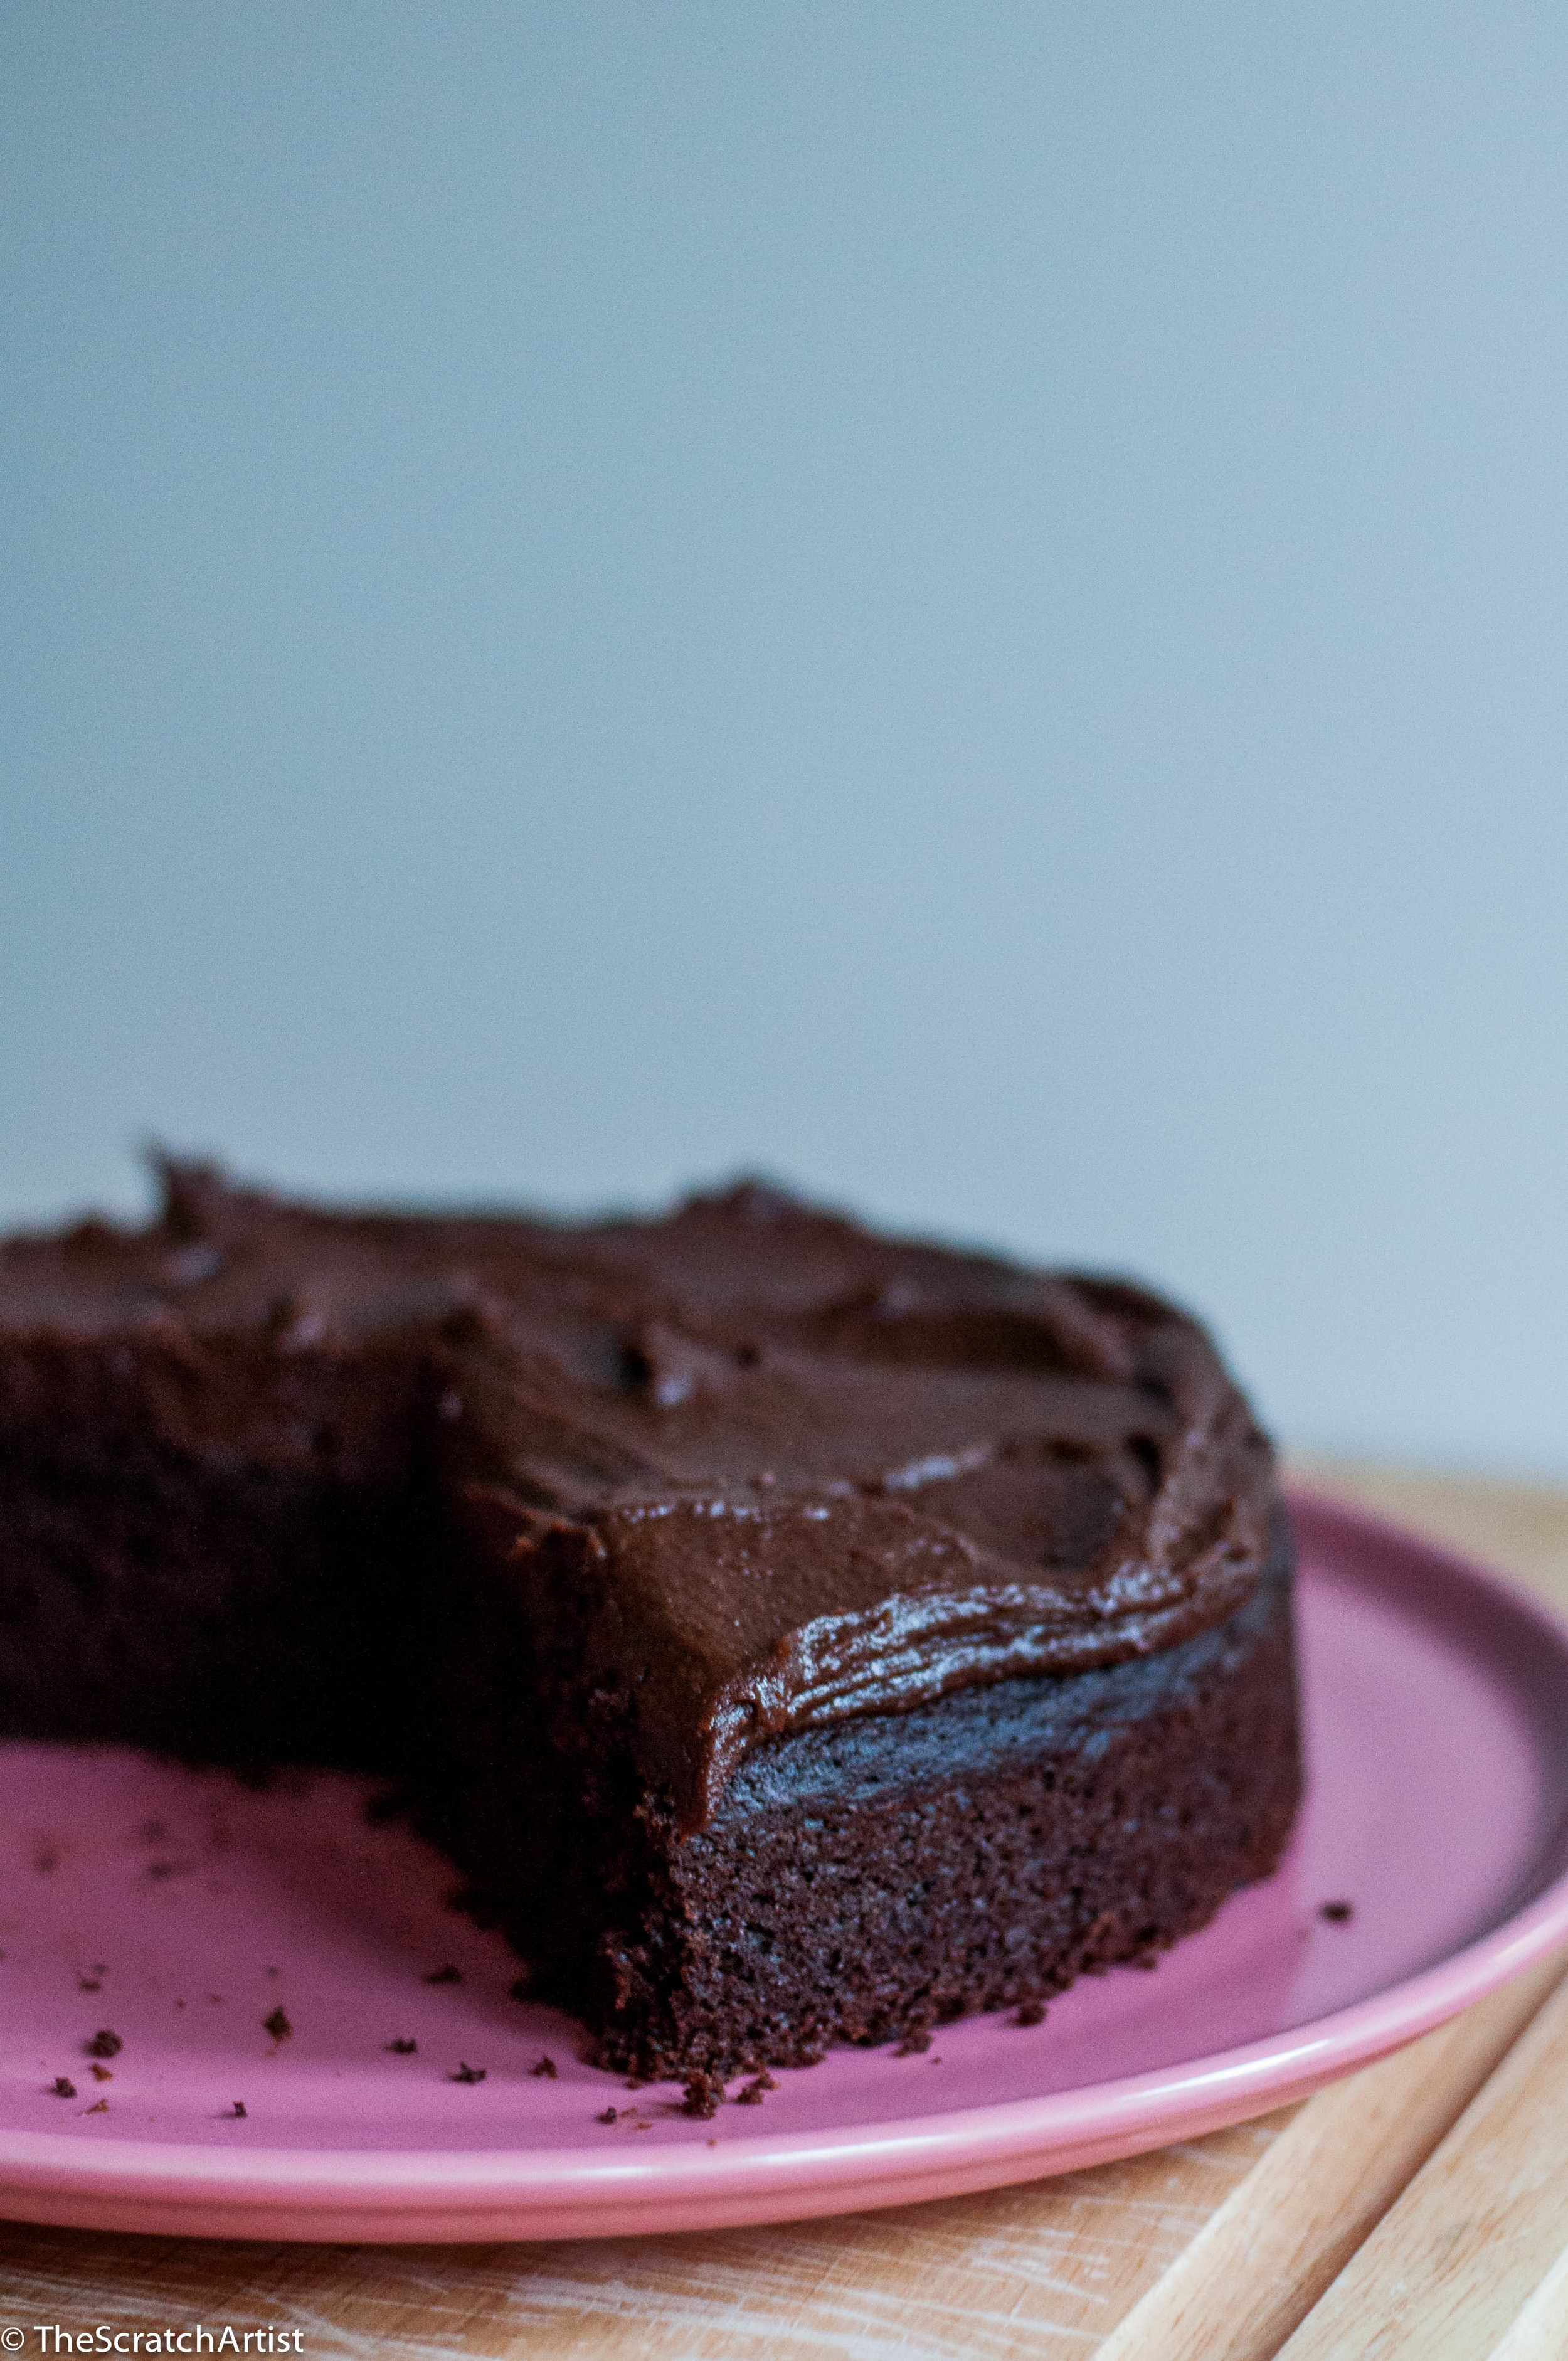 CHOCOLATE CAKE WITH DATE FROSTING